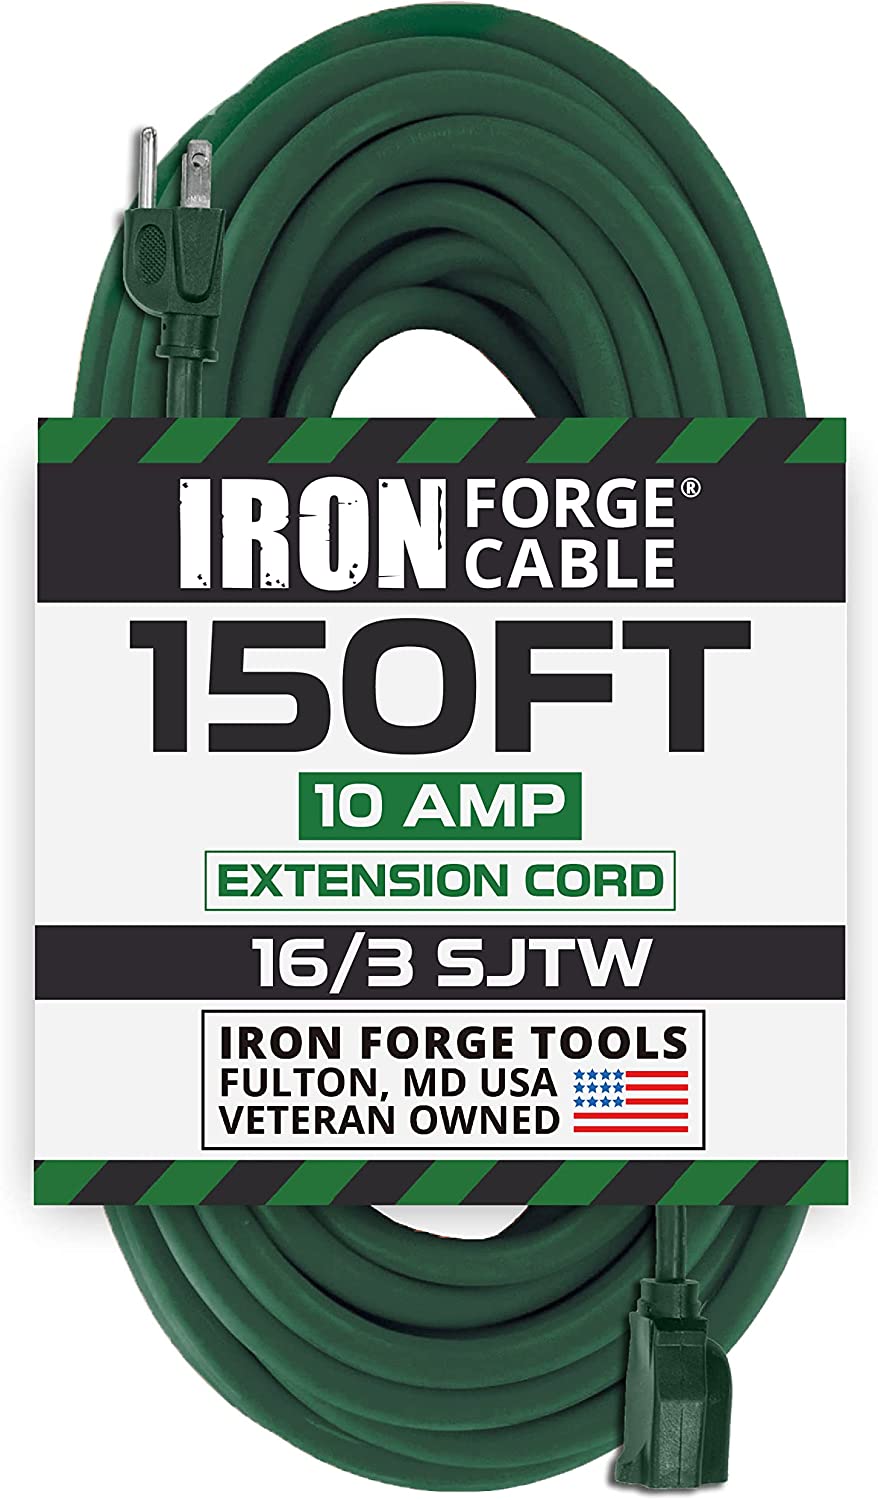 IRON FORGE CABLE 2 Pack of 25 Ft Outdoor Extension Cords with Power India